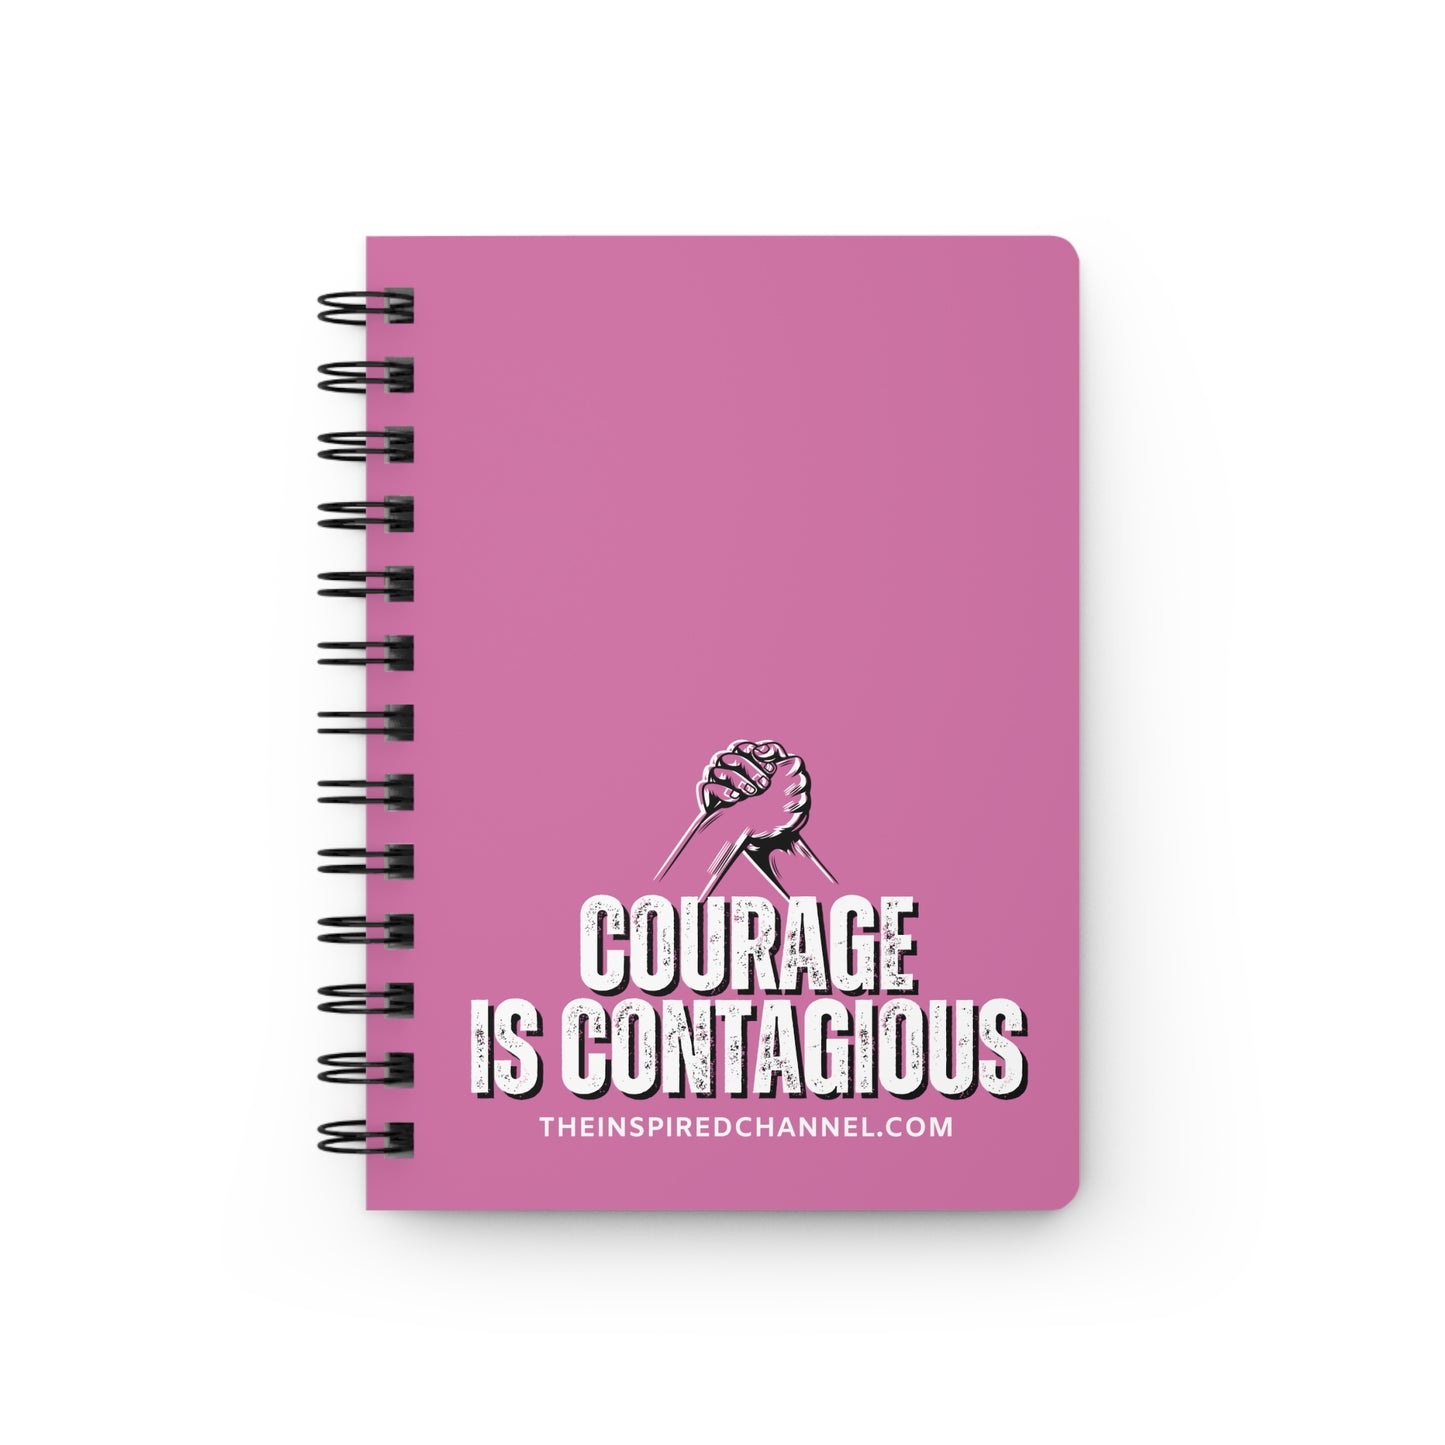 INSPIRED Courage Is Contagious Vio Spiral Bound Journal